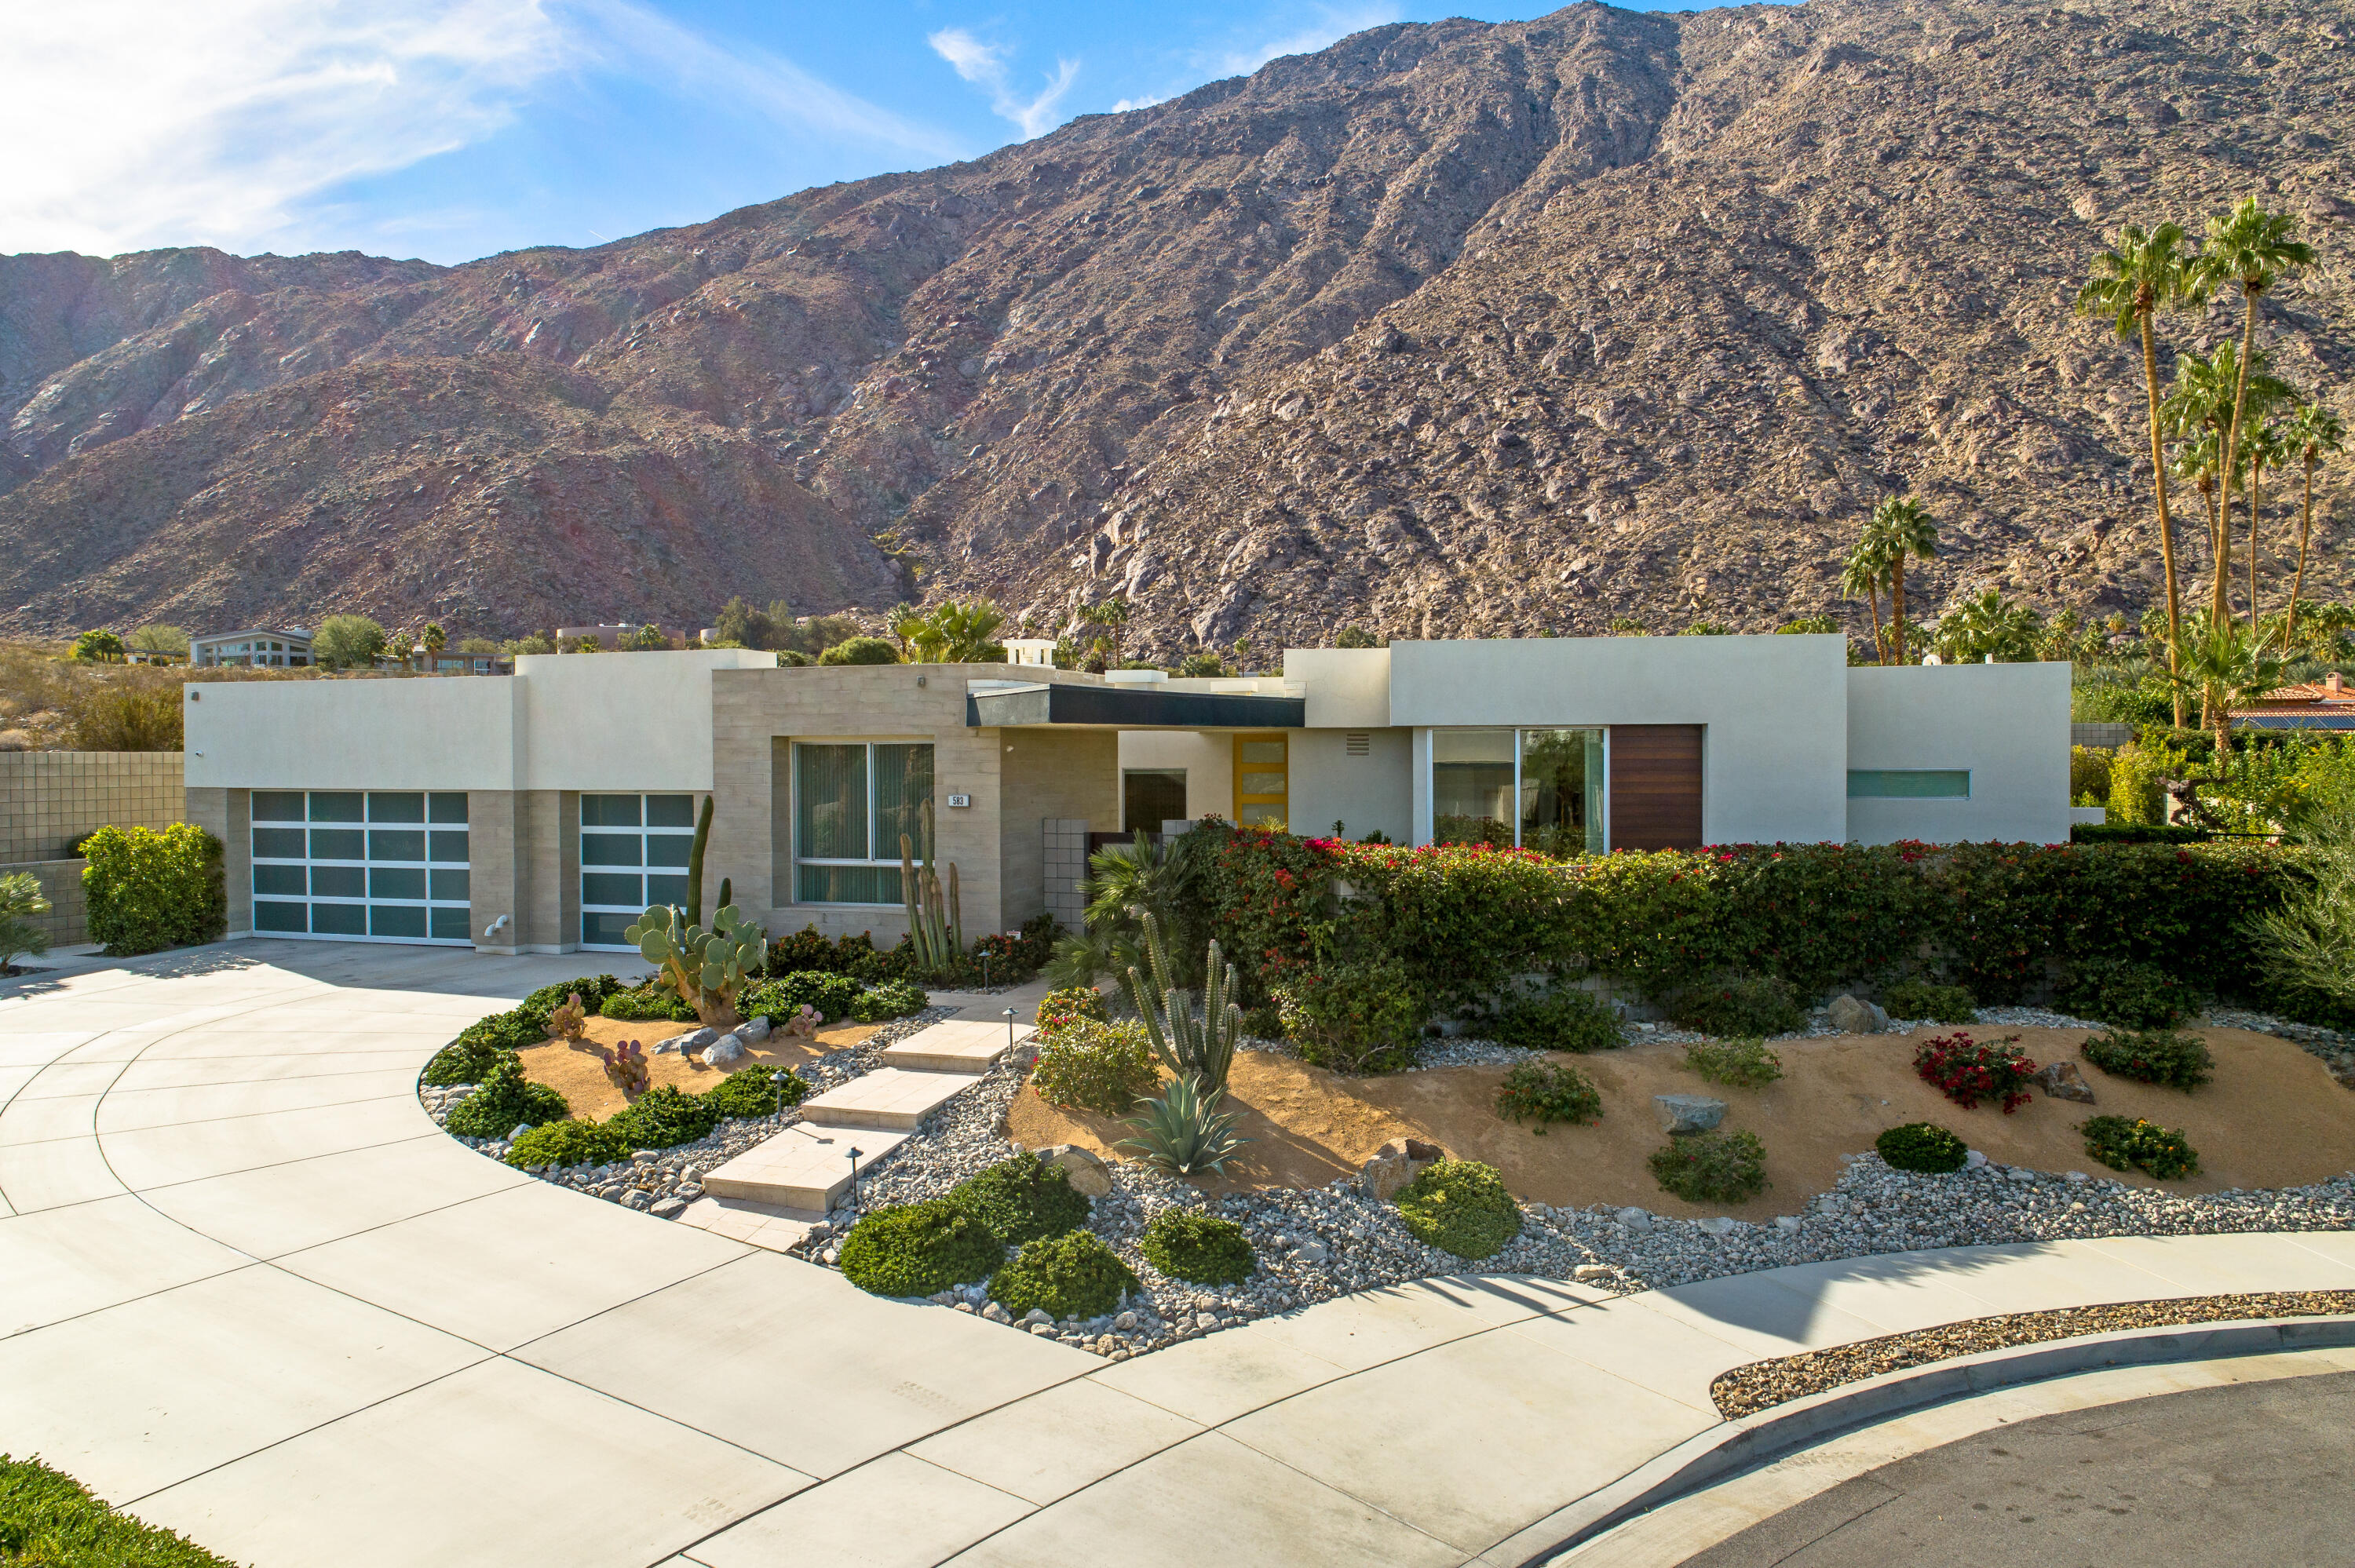 Experience stellar views from this custom contemporary home in the stunning South Palm Springs community of Skye. Surrounded by the dramatic backdrop of the San Jacinto Mountains and situated on a generous .35 AC lot, this 4 bedroom, casita included, 5 bathroom residence offers a spacious and well-designed floor plan with luxury finishes. Enjoy the finest gourmet chef's kitchen with Jenn-Air appliances plus an expansive food-prep ready island with waterfall quartz countertop. A custom floating onyx hearth spans the length of the living room wall beneath the fireplace, adding a dramatic statement to the space. Warmth, comfort and luxury are yours in the primary suite with its spa-like bath showcasing a freestanding soaking tub. The mountain views from the rear wall of glass are framed by the architecturally significant curve of the structure's roofline. A multitude of indoor/outdoor seating spaces exist to enjoy the idyllic views; whether it be from your Primary Suite, poolside or basking in the glow of the Roger Hopkins fire pit, you can't help experience the pure essence of desert living. The 1BD, 1 BA casita w/mini-fridge and sink offers privacy for guests, or solitude for self. Hardscape and landscape were designed and  customized by Sellers and include specimen plants, travertine pavers set in sand, plus full irrigation and exterior lighting. This exquisite home encompasses all of the finest qualities that living in Palm Springs has to offer. Walk to downtown.